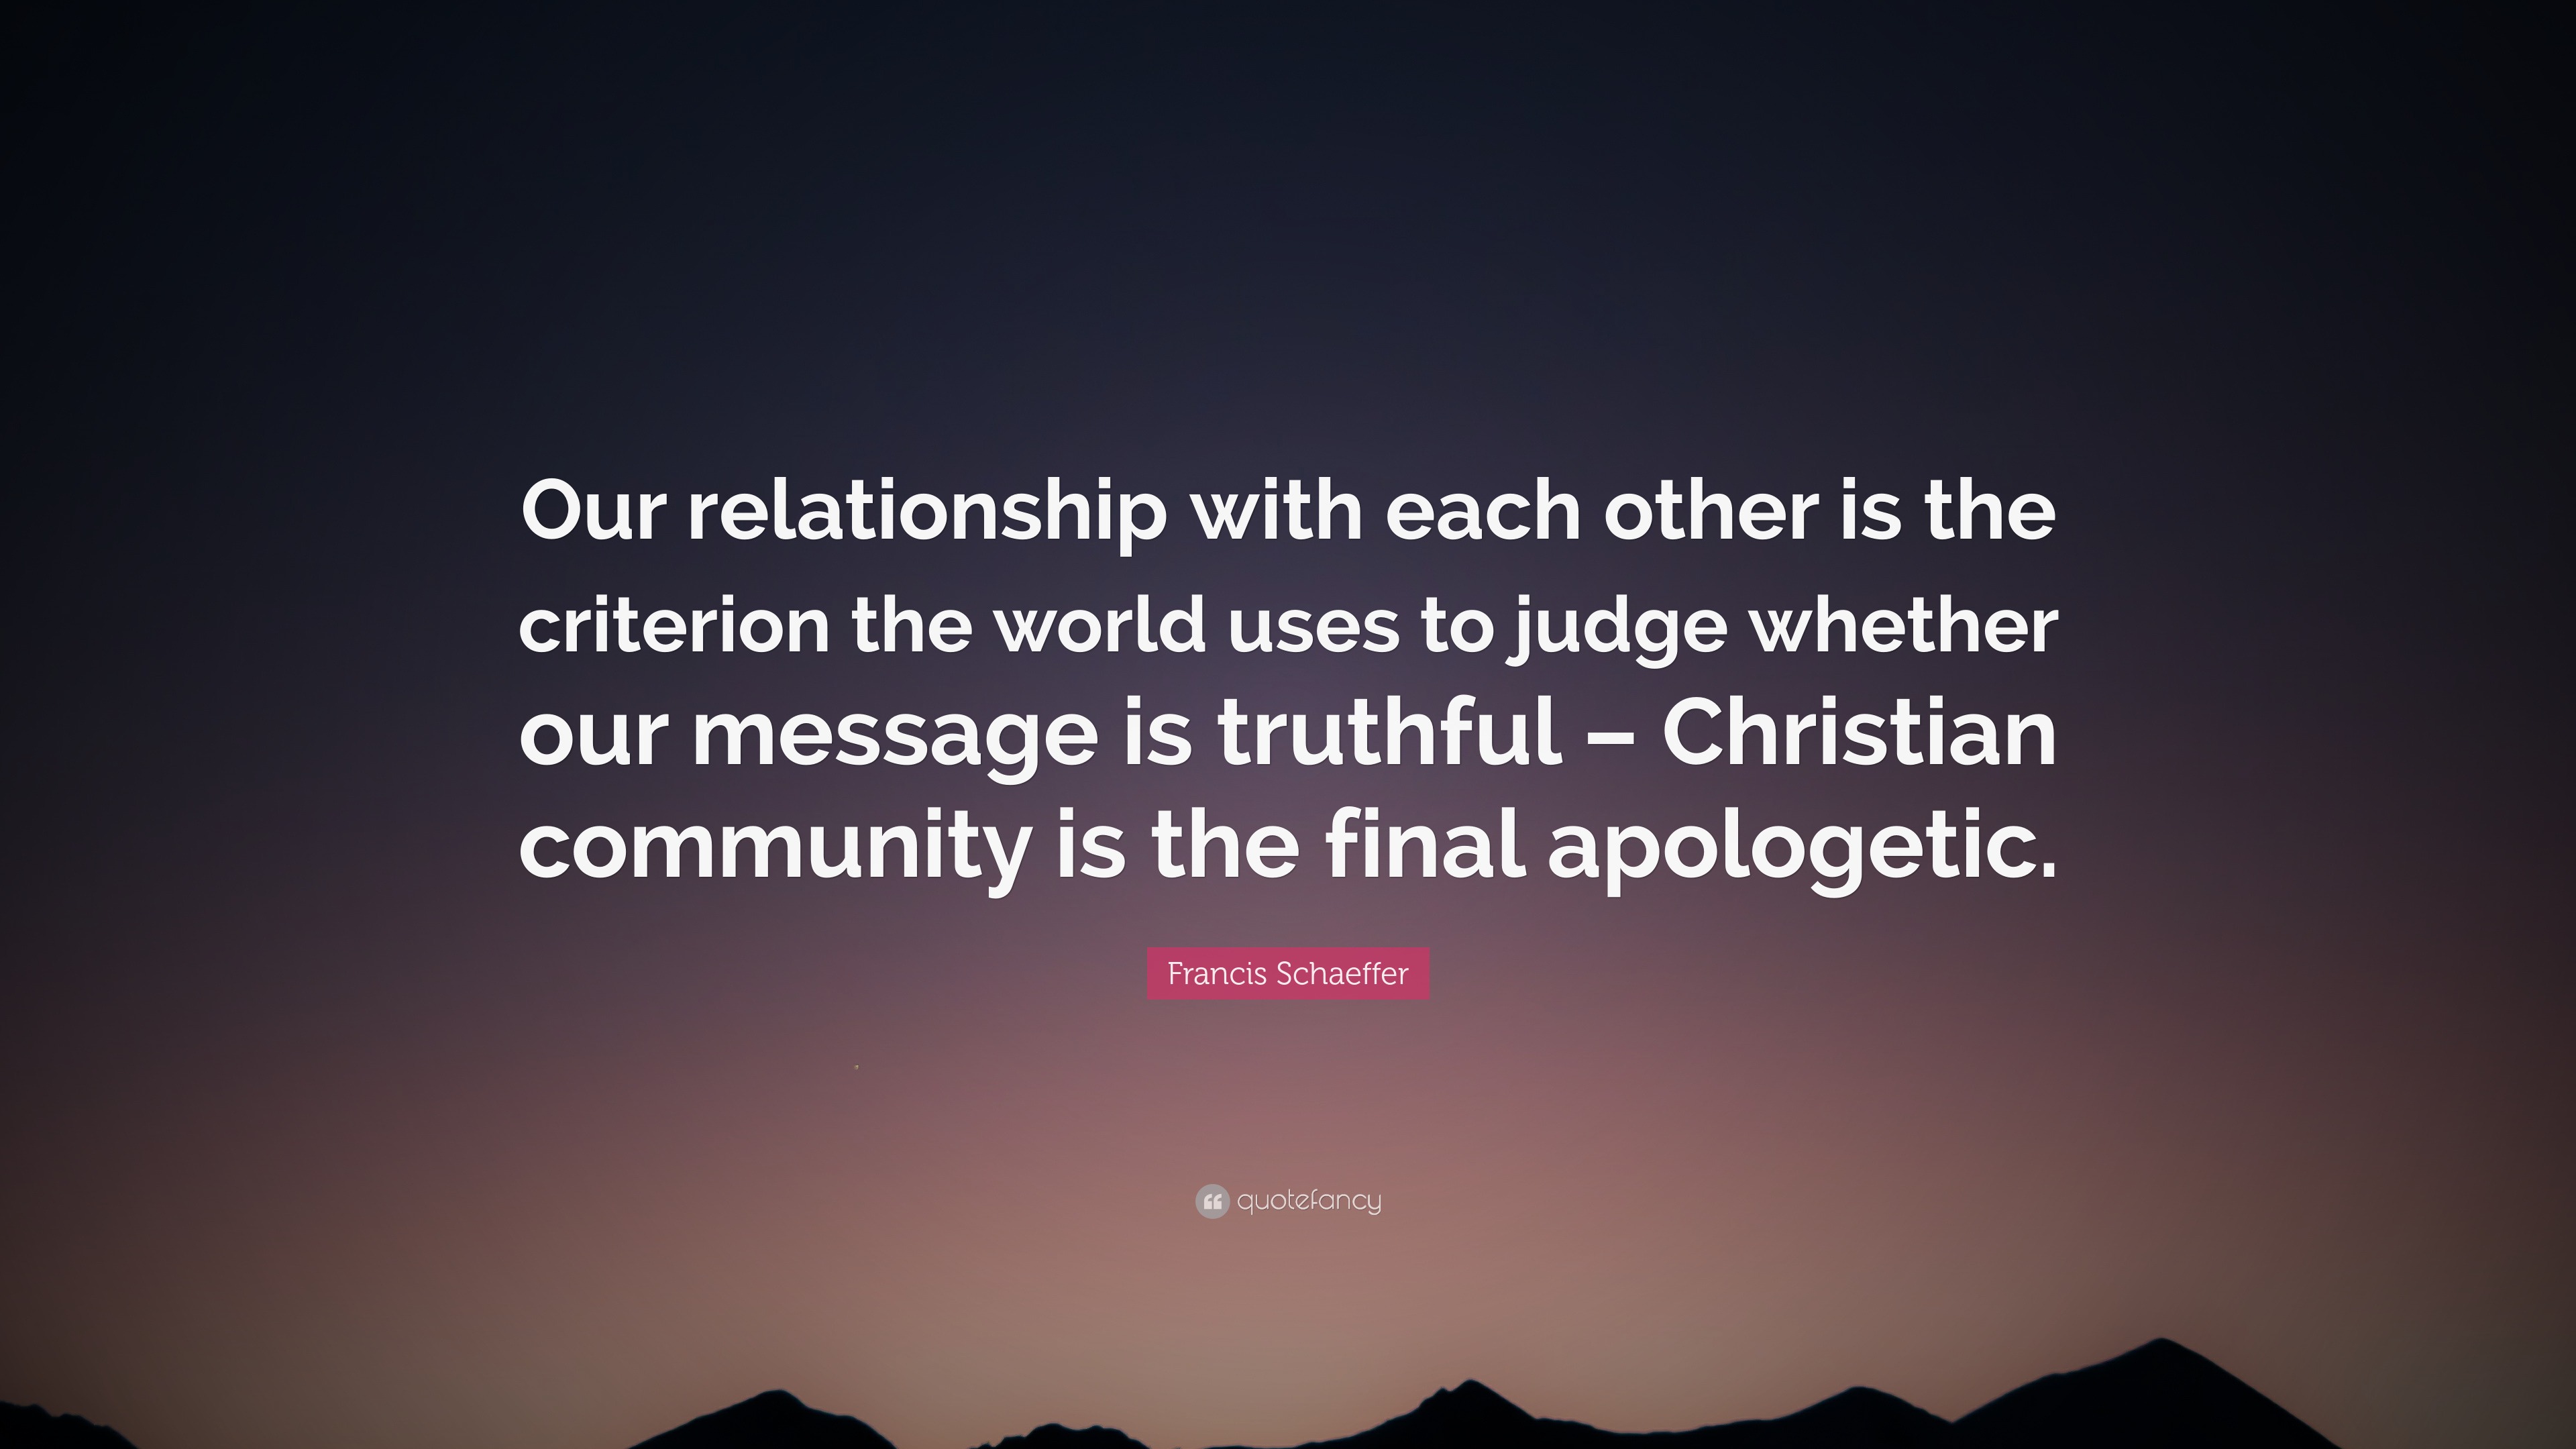 Francis Schaeffer Quote: “Our relationship with each other is the